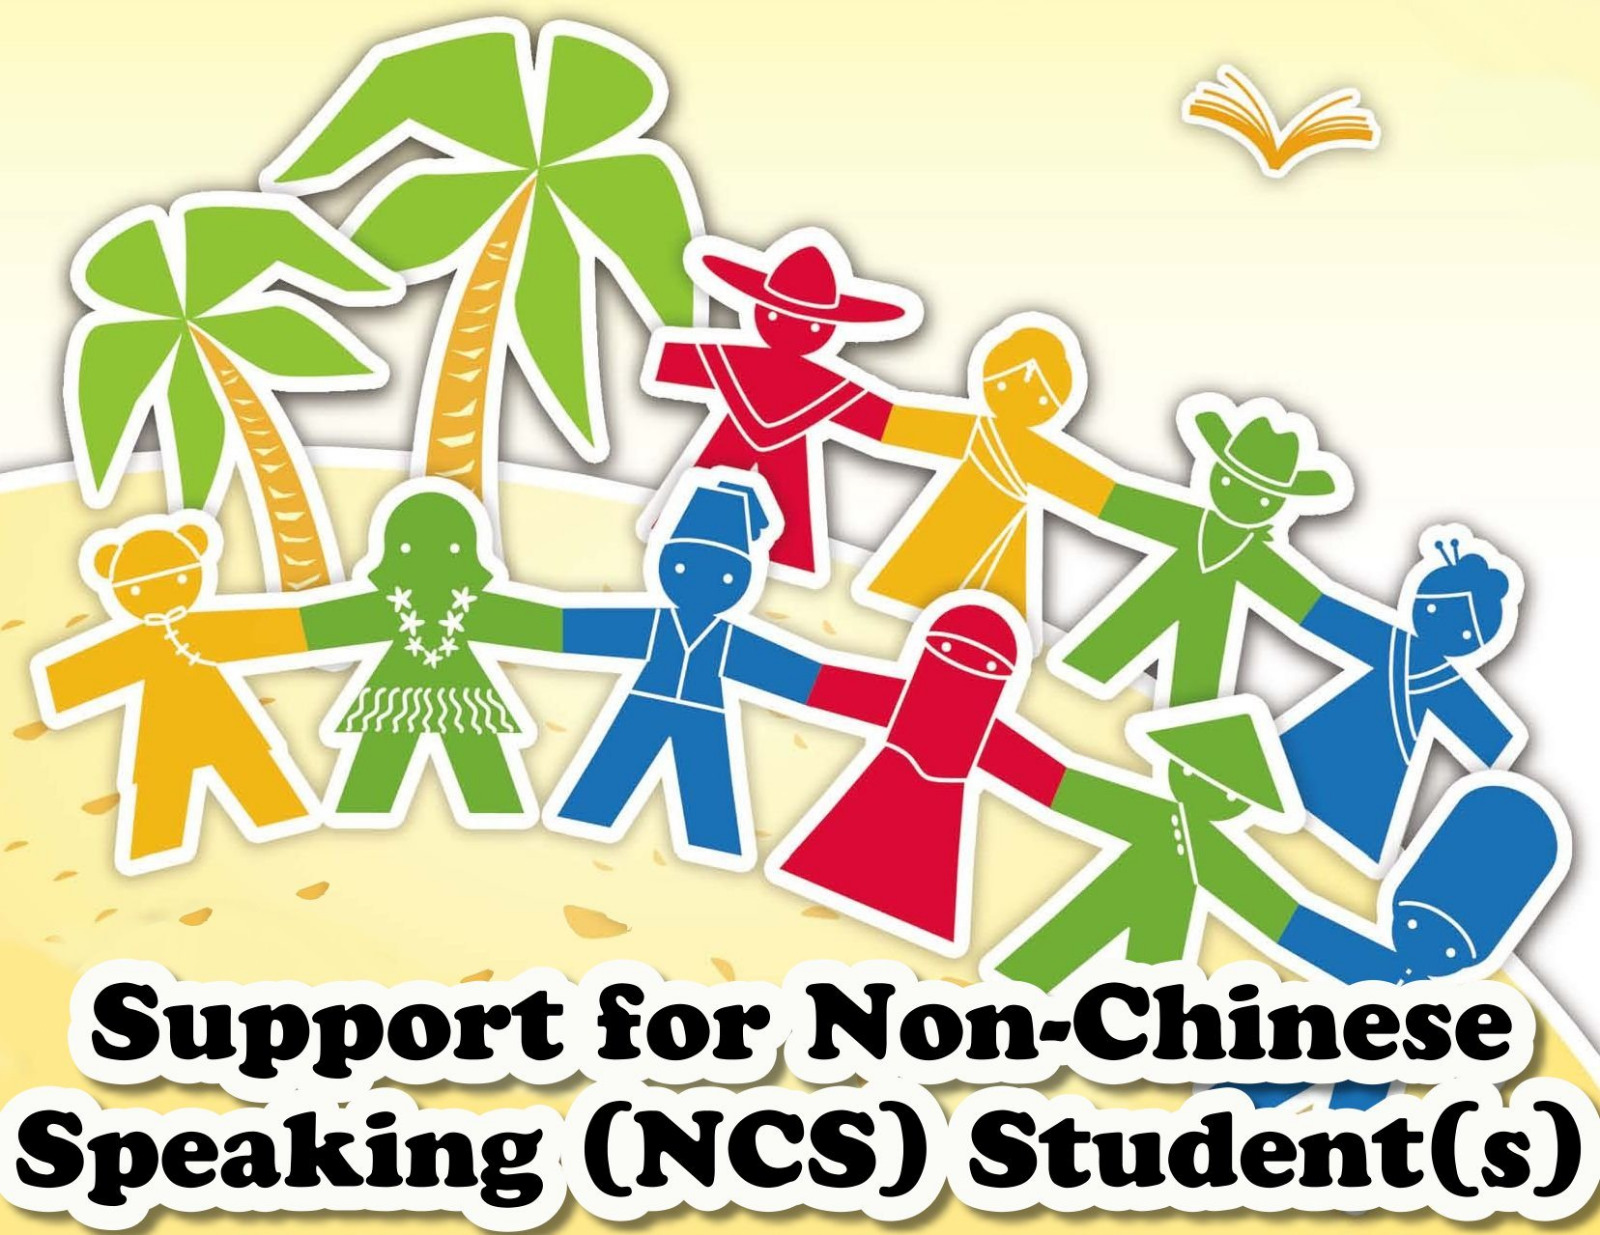 Education Support Provided for Non-Chinese Speaking (NCS) Student(s)